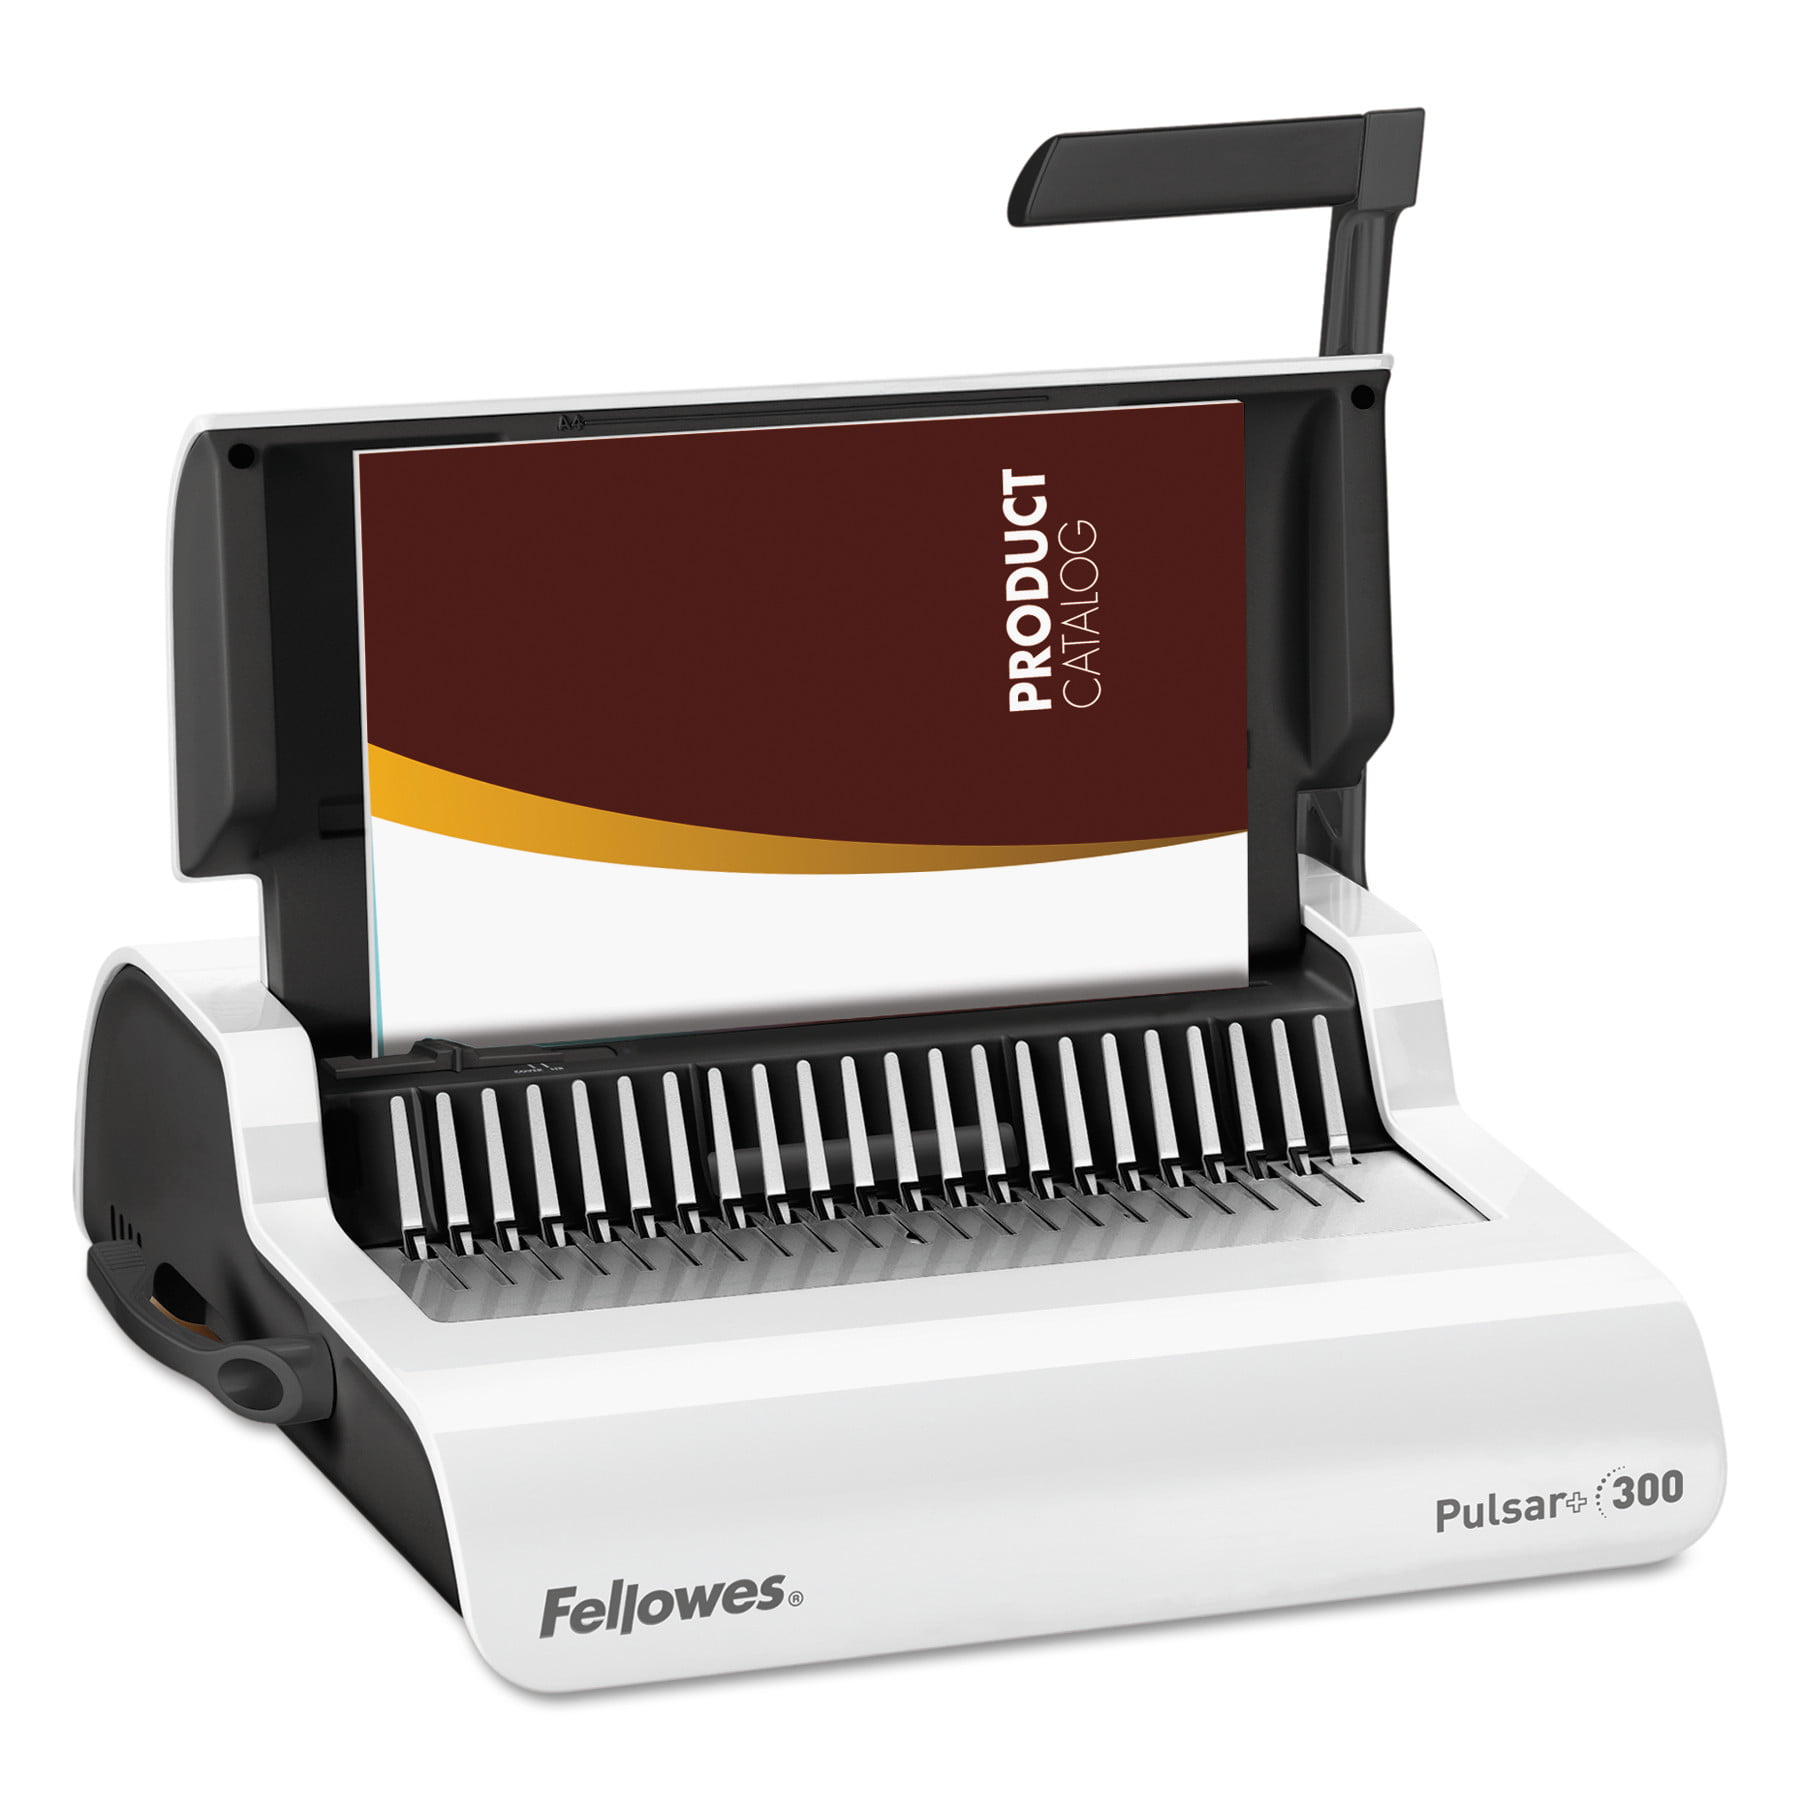 Fellowes Mfg. Co. Pulsar E Electric Comb Binding System, 300 